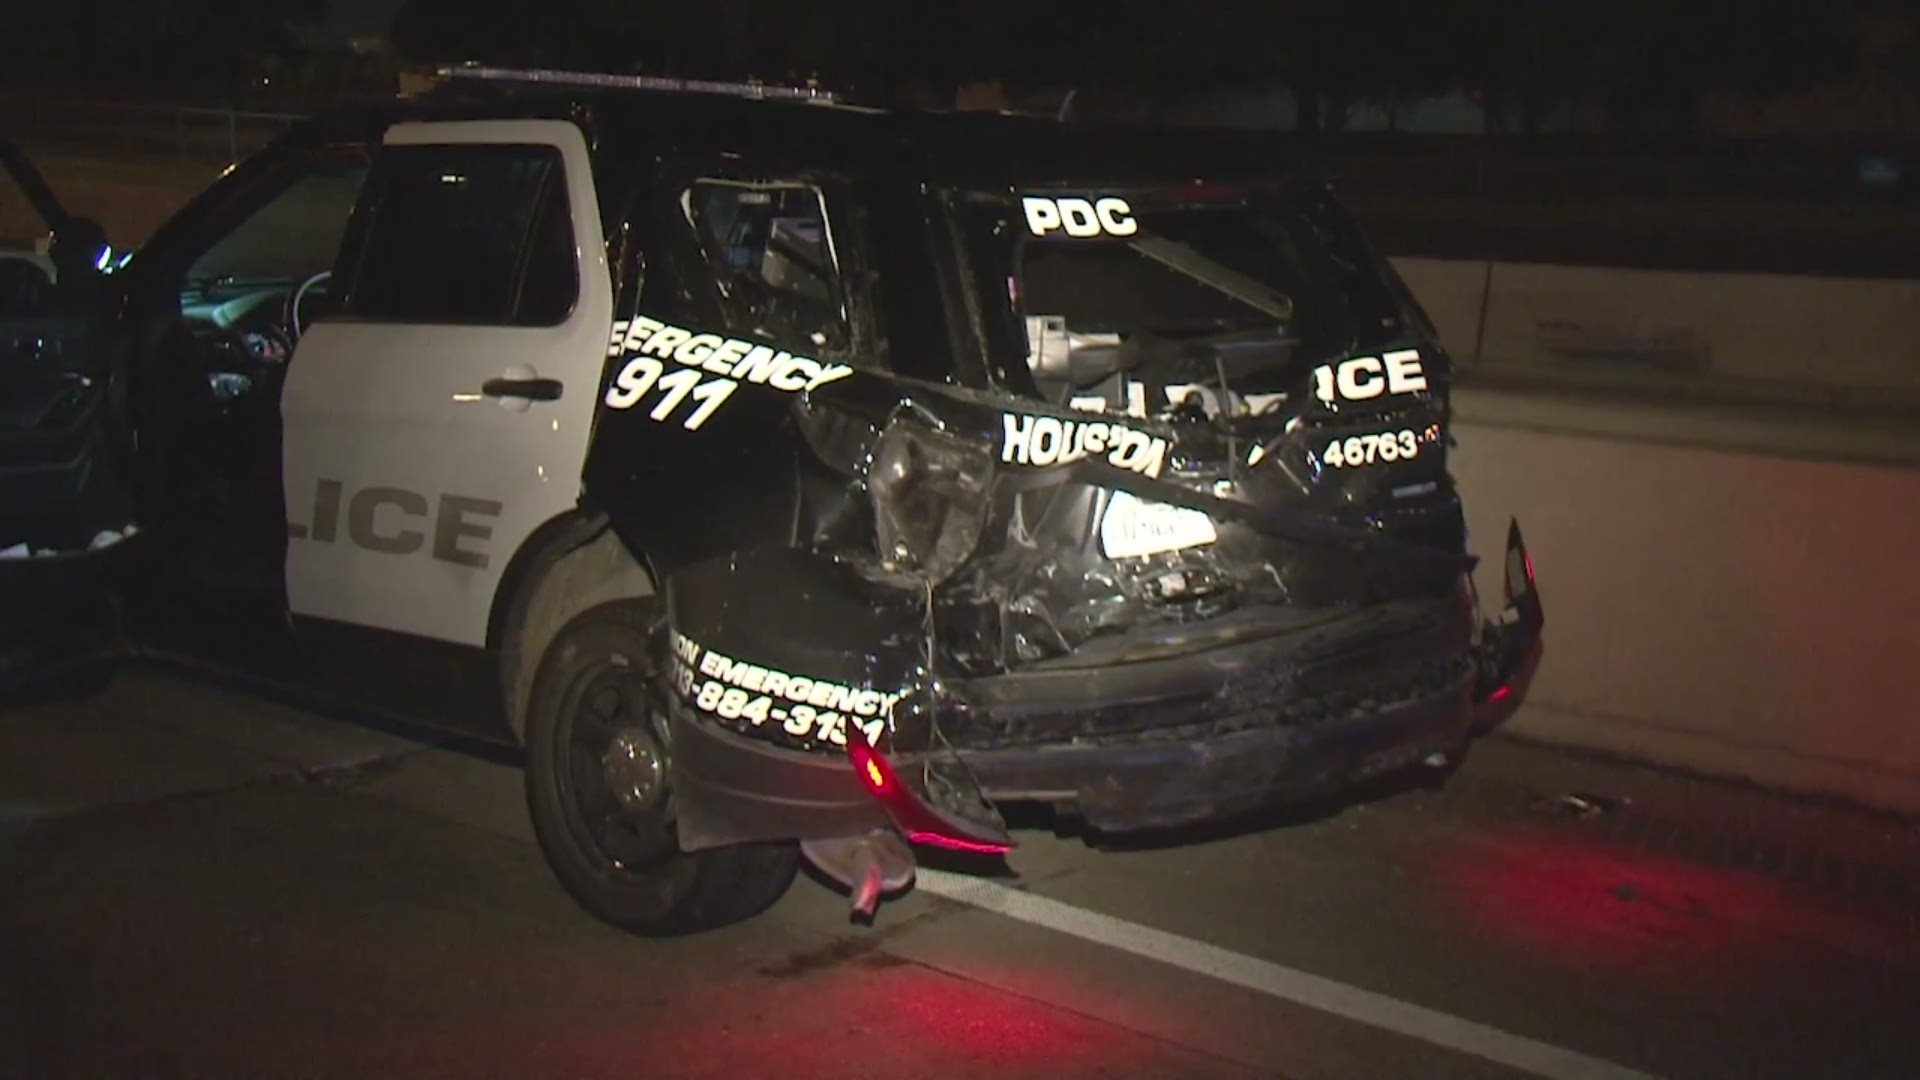 A suspected drunk driver was arrested overnight after police say he slammed into the back of a patrol SUV while they were assisting a disabled motorist on the East Freeway.